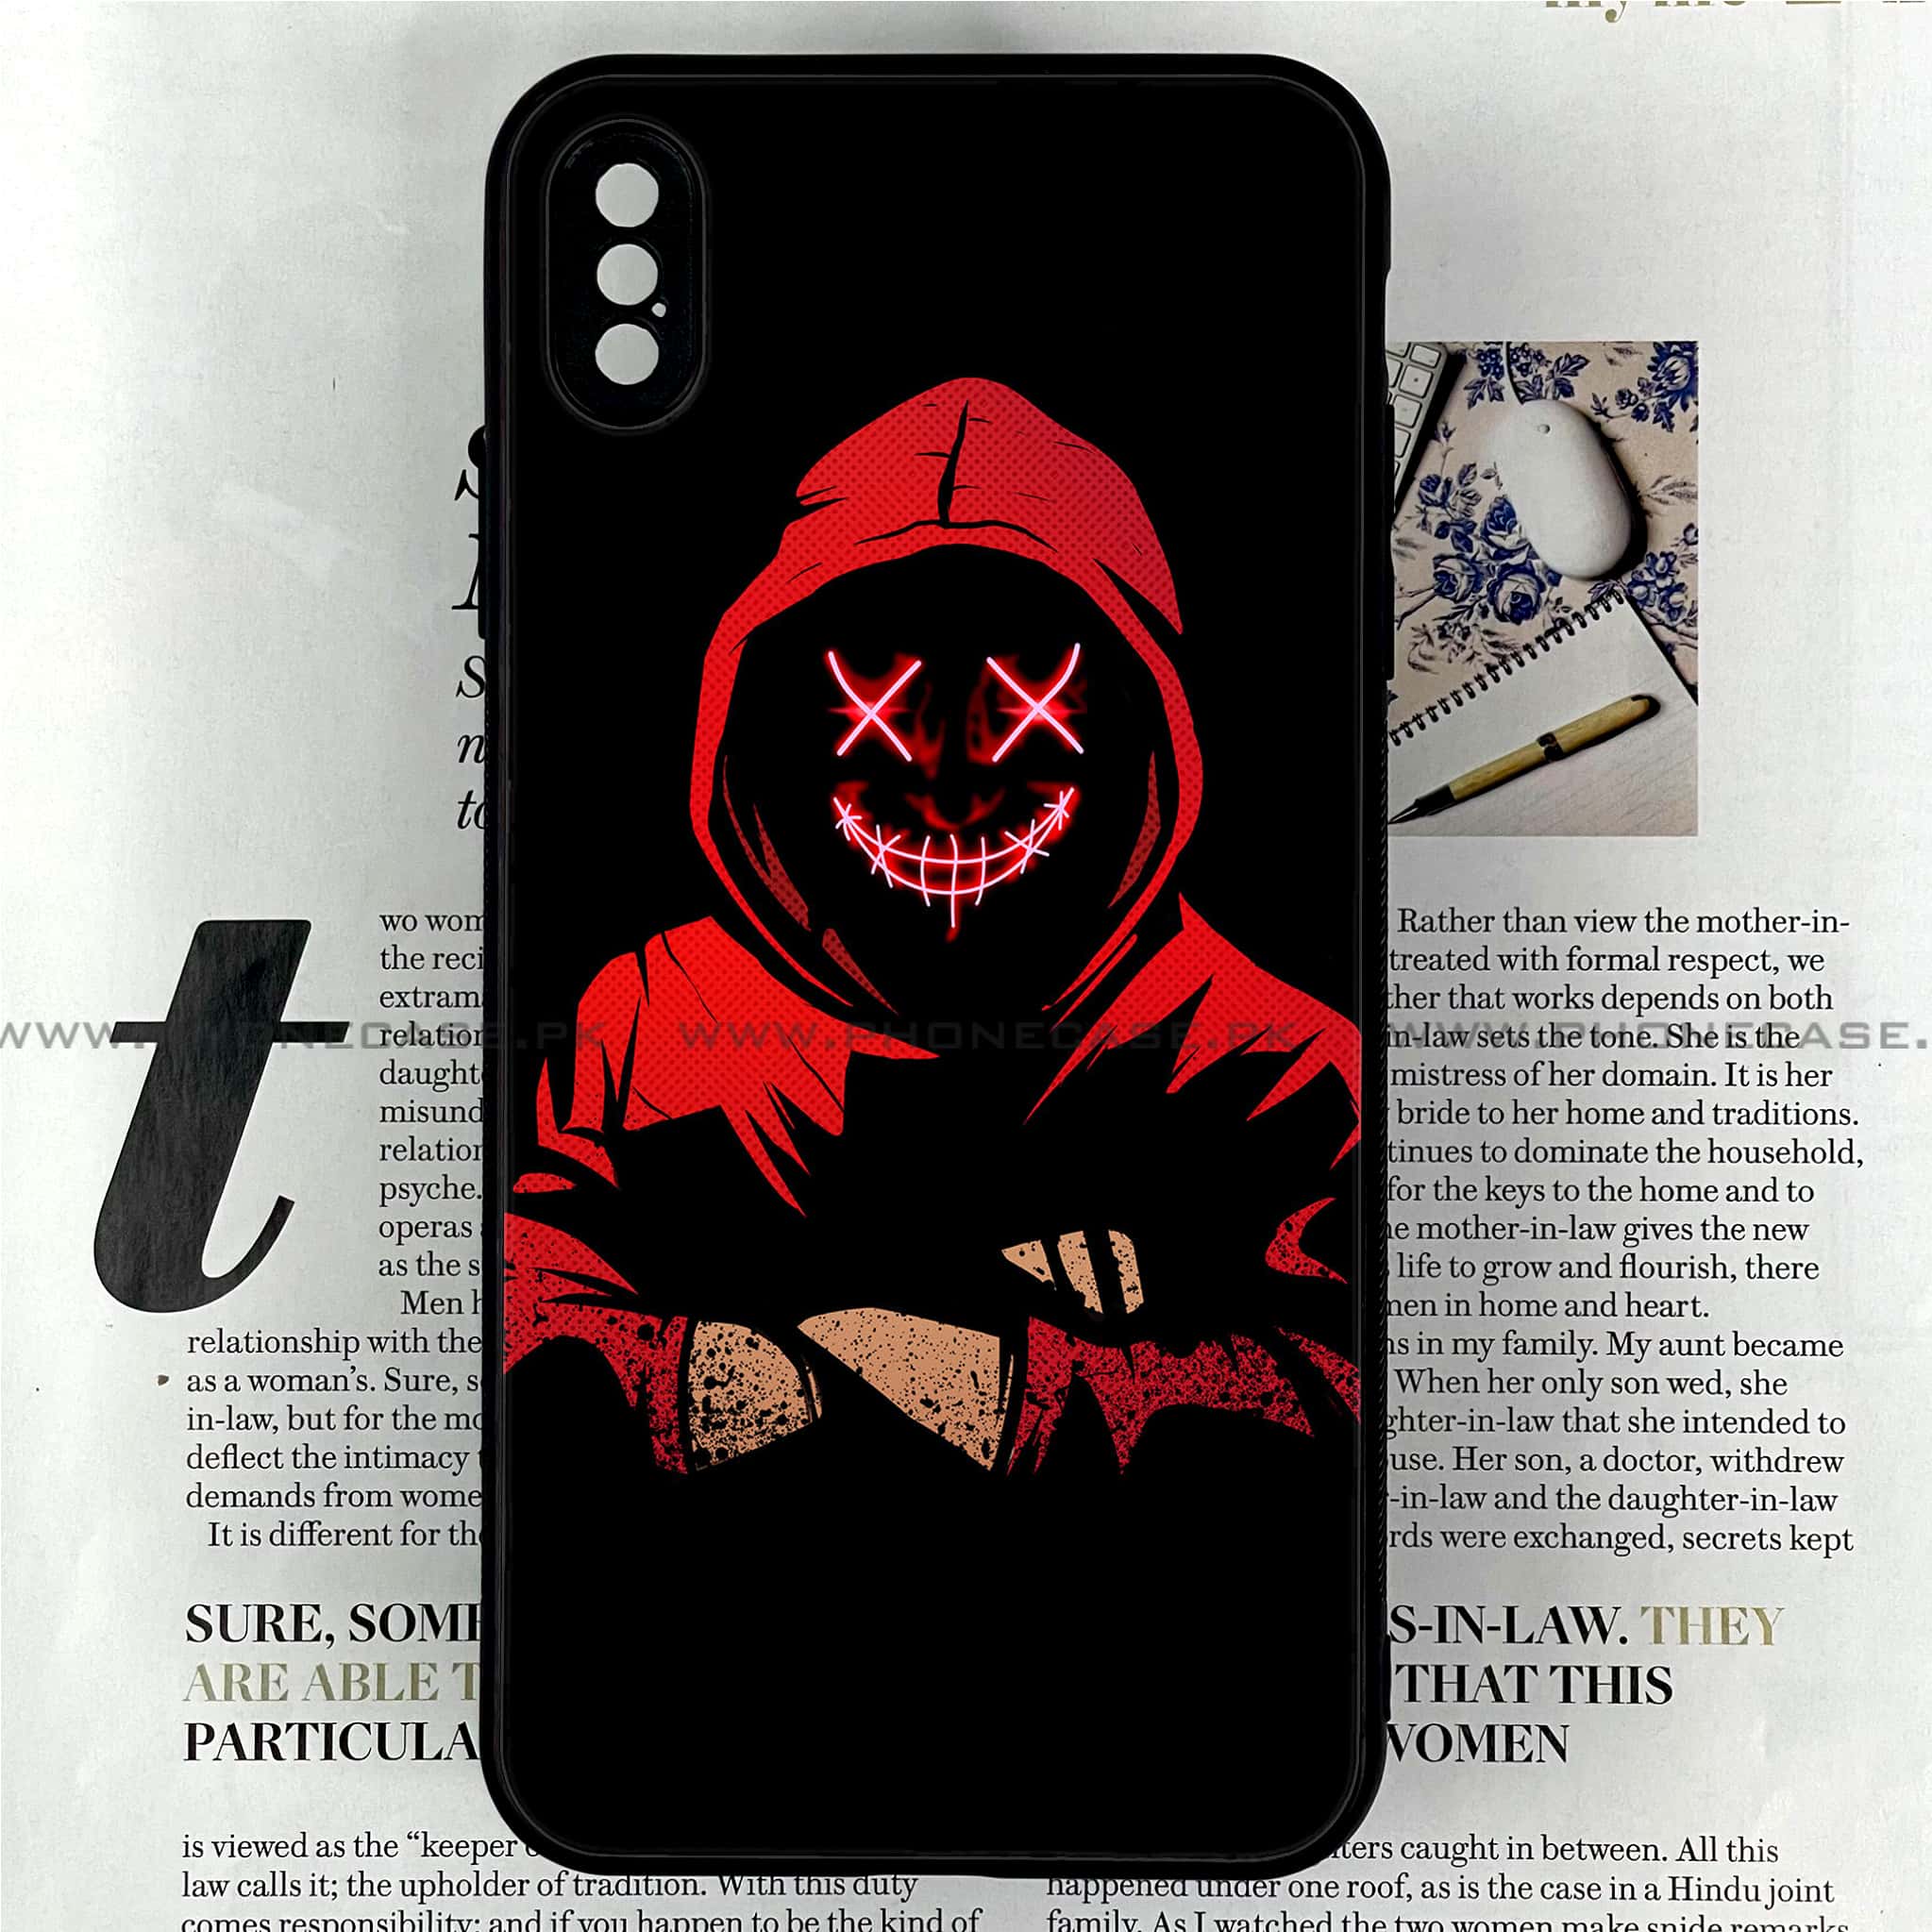 iPhone XS Max - Anonymous 2.0  - Premium Printed Glass soft Bumper shock Proof Case